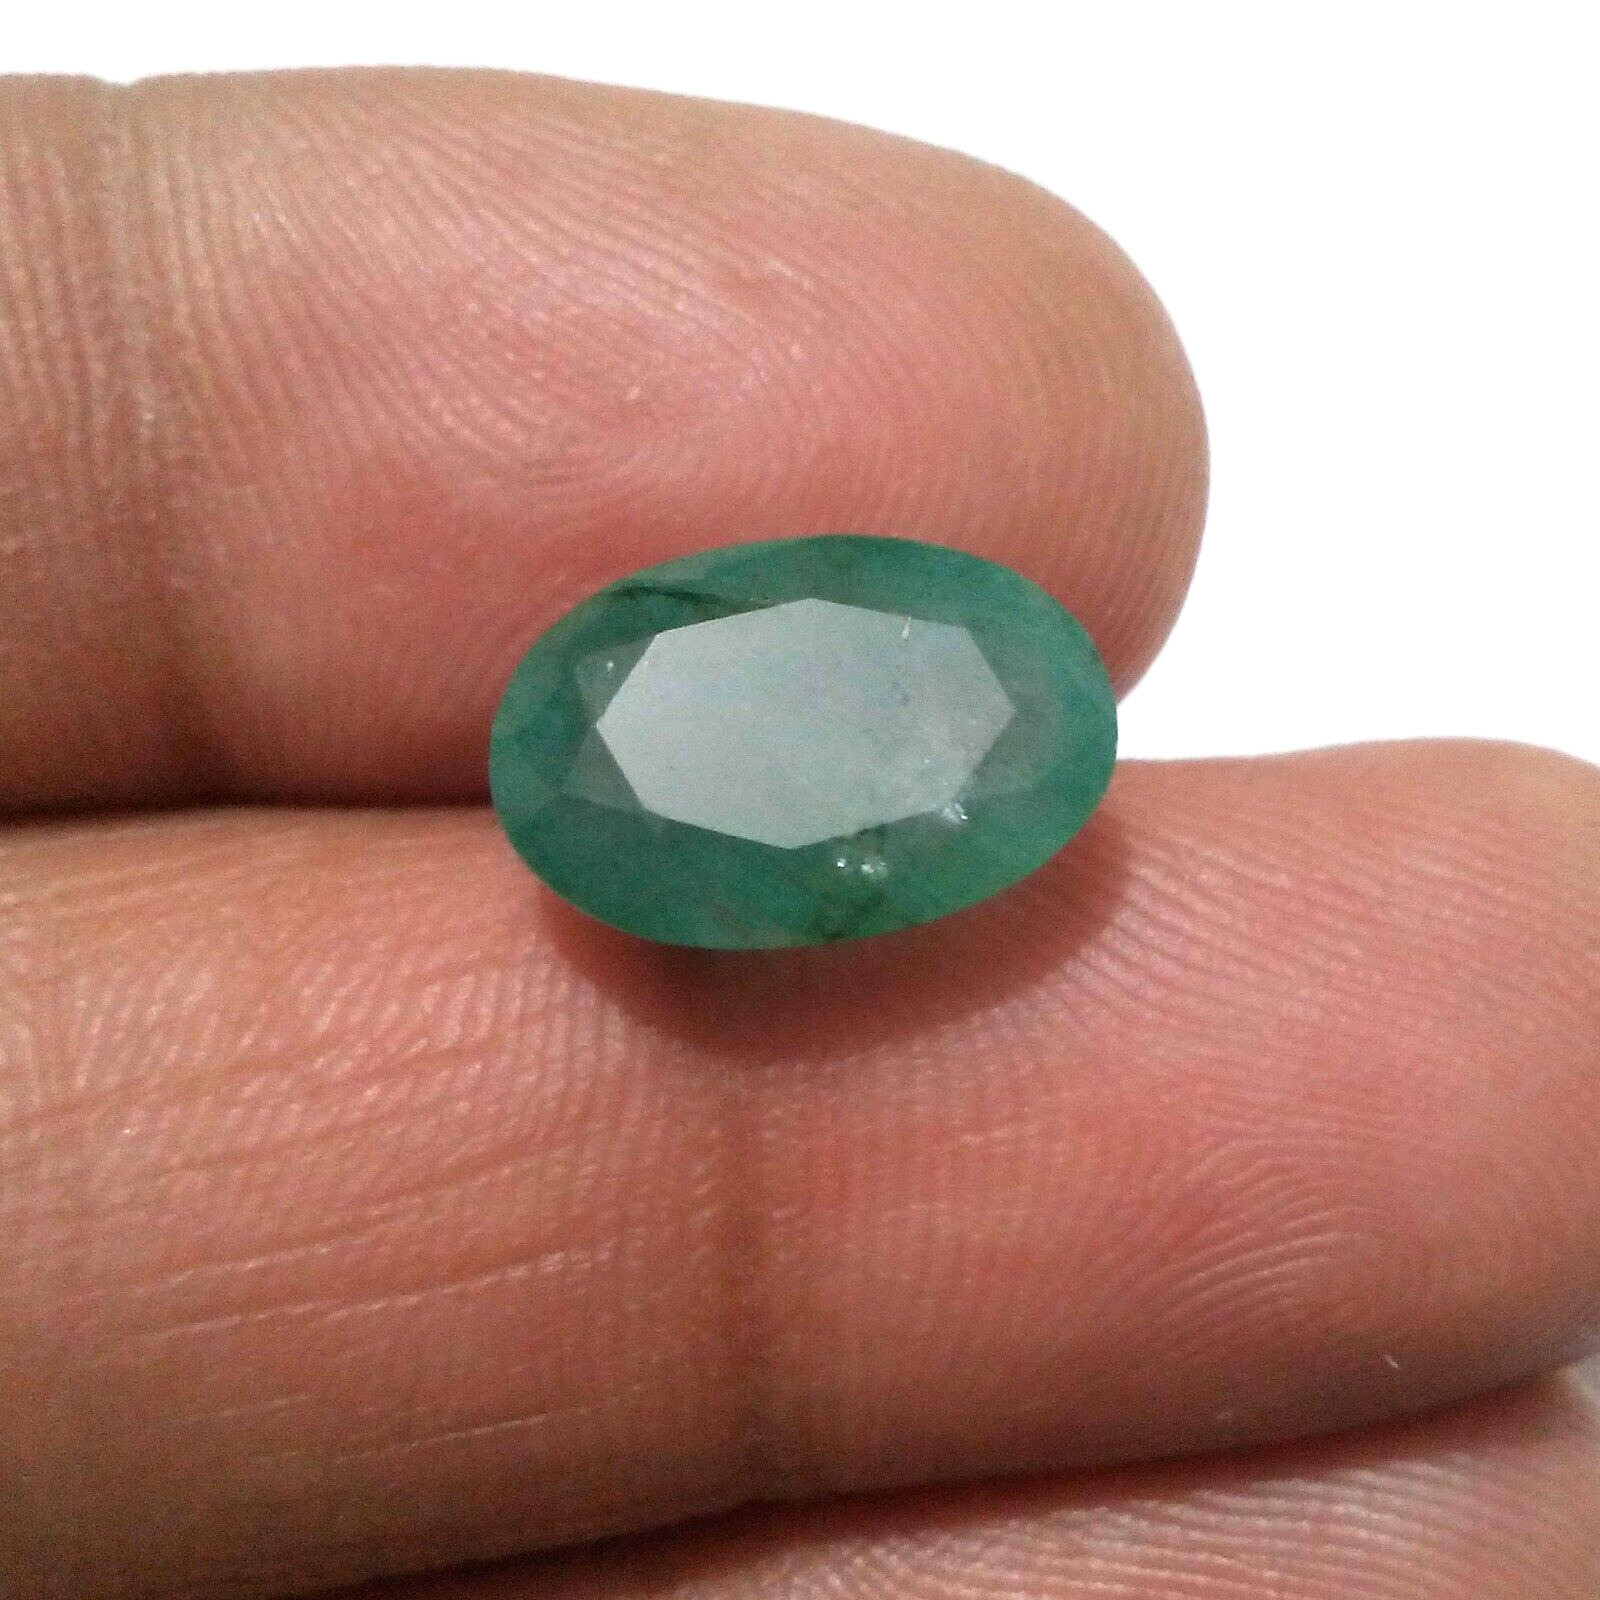 Fabulous Zambian Emerald Oval 6.35 Crt 100% Natural Green Faceted Loose Gemstone